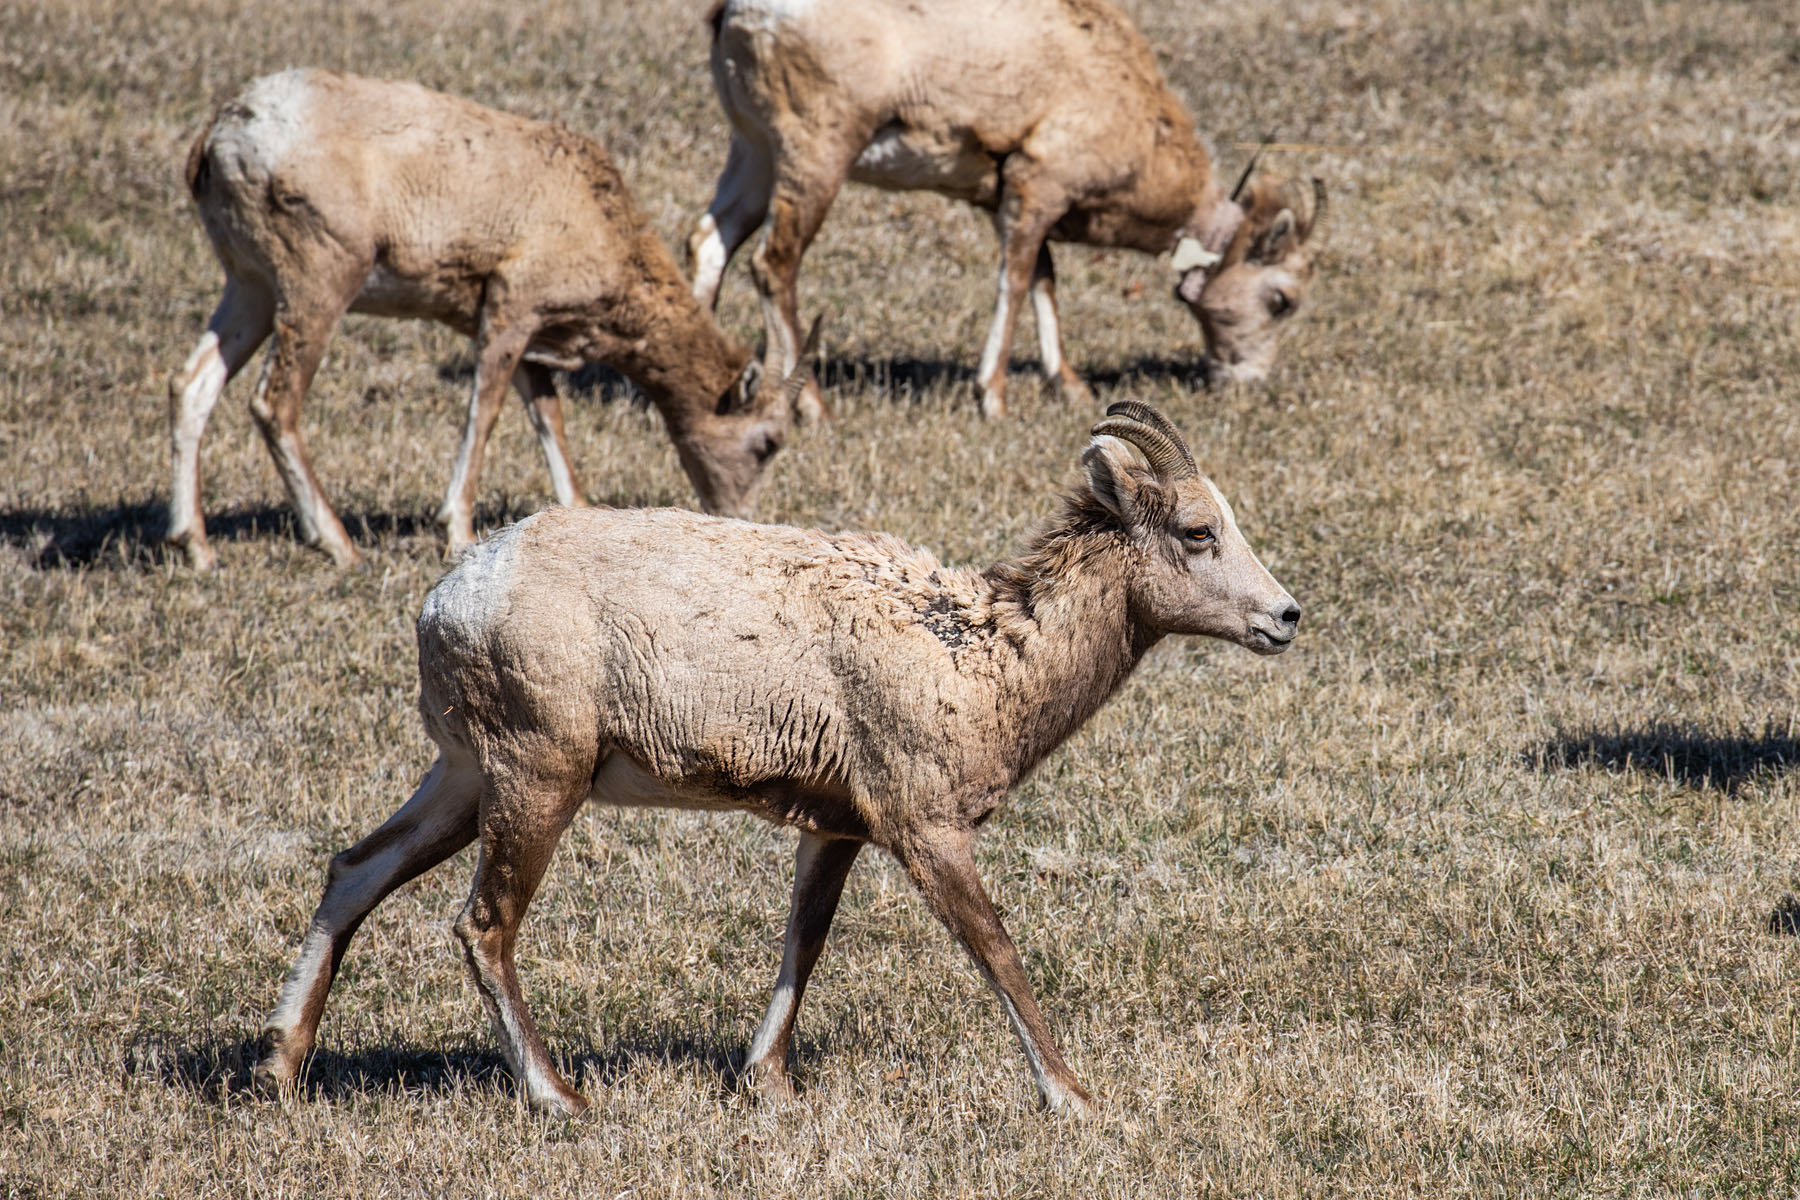 On the trip down to Texas, Bighorn ewe in Custer State Park, SD.  Click for next photo.